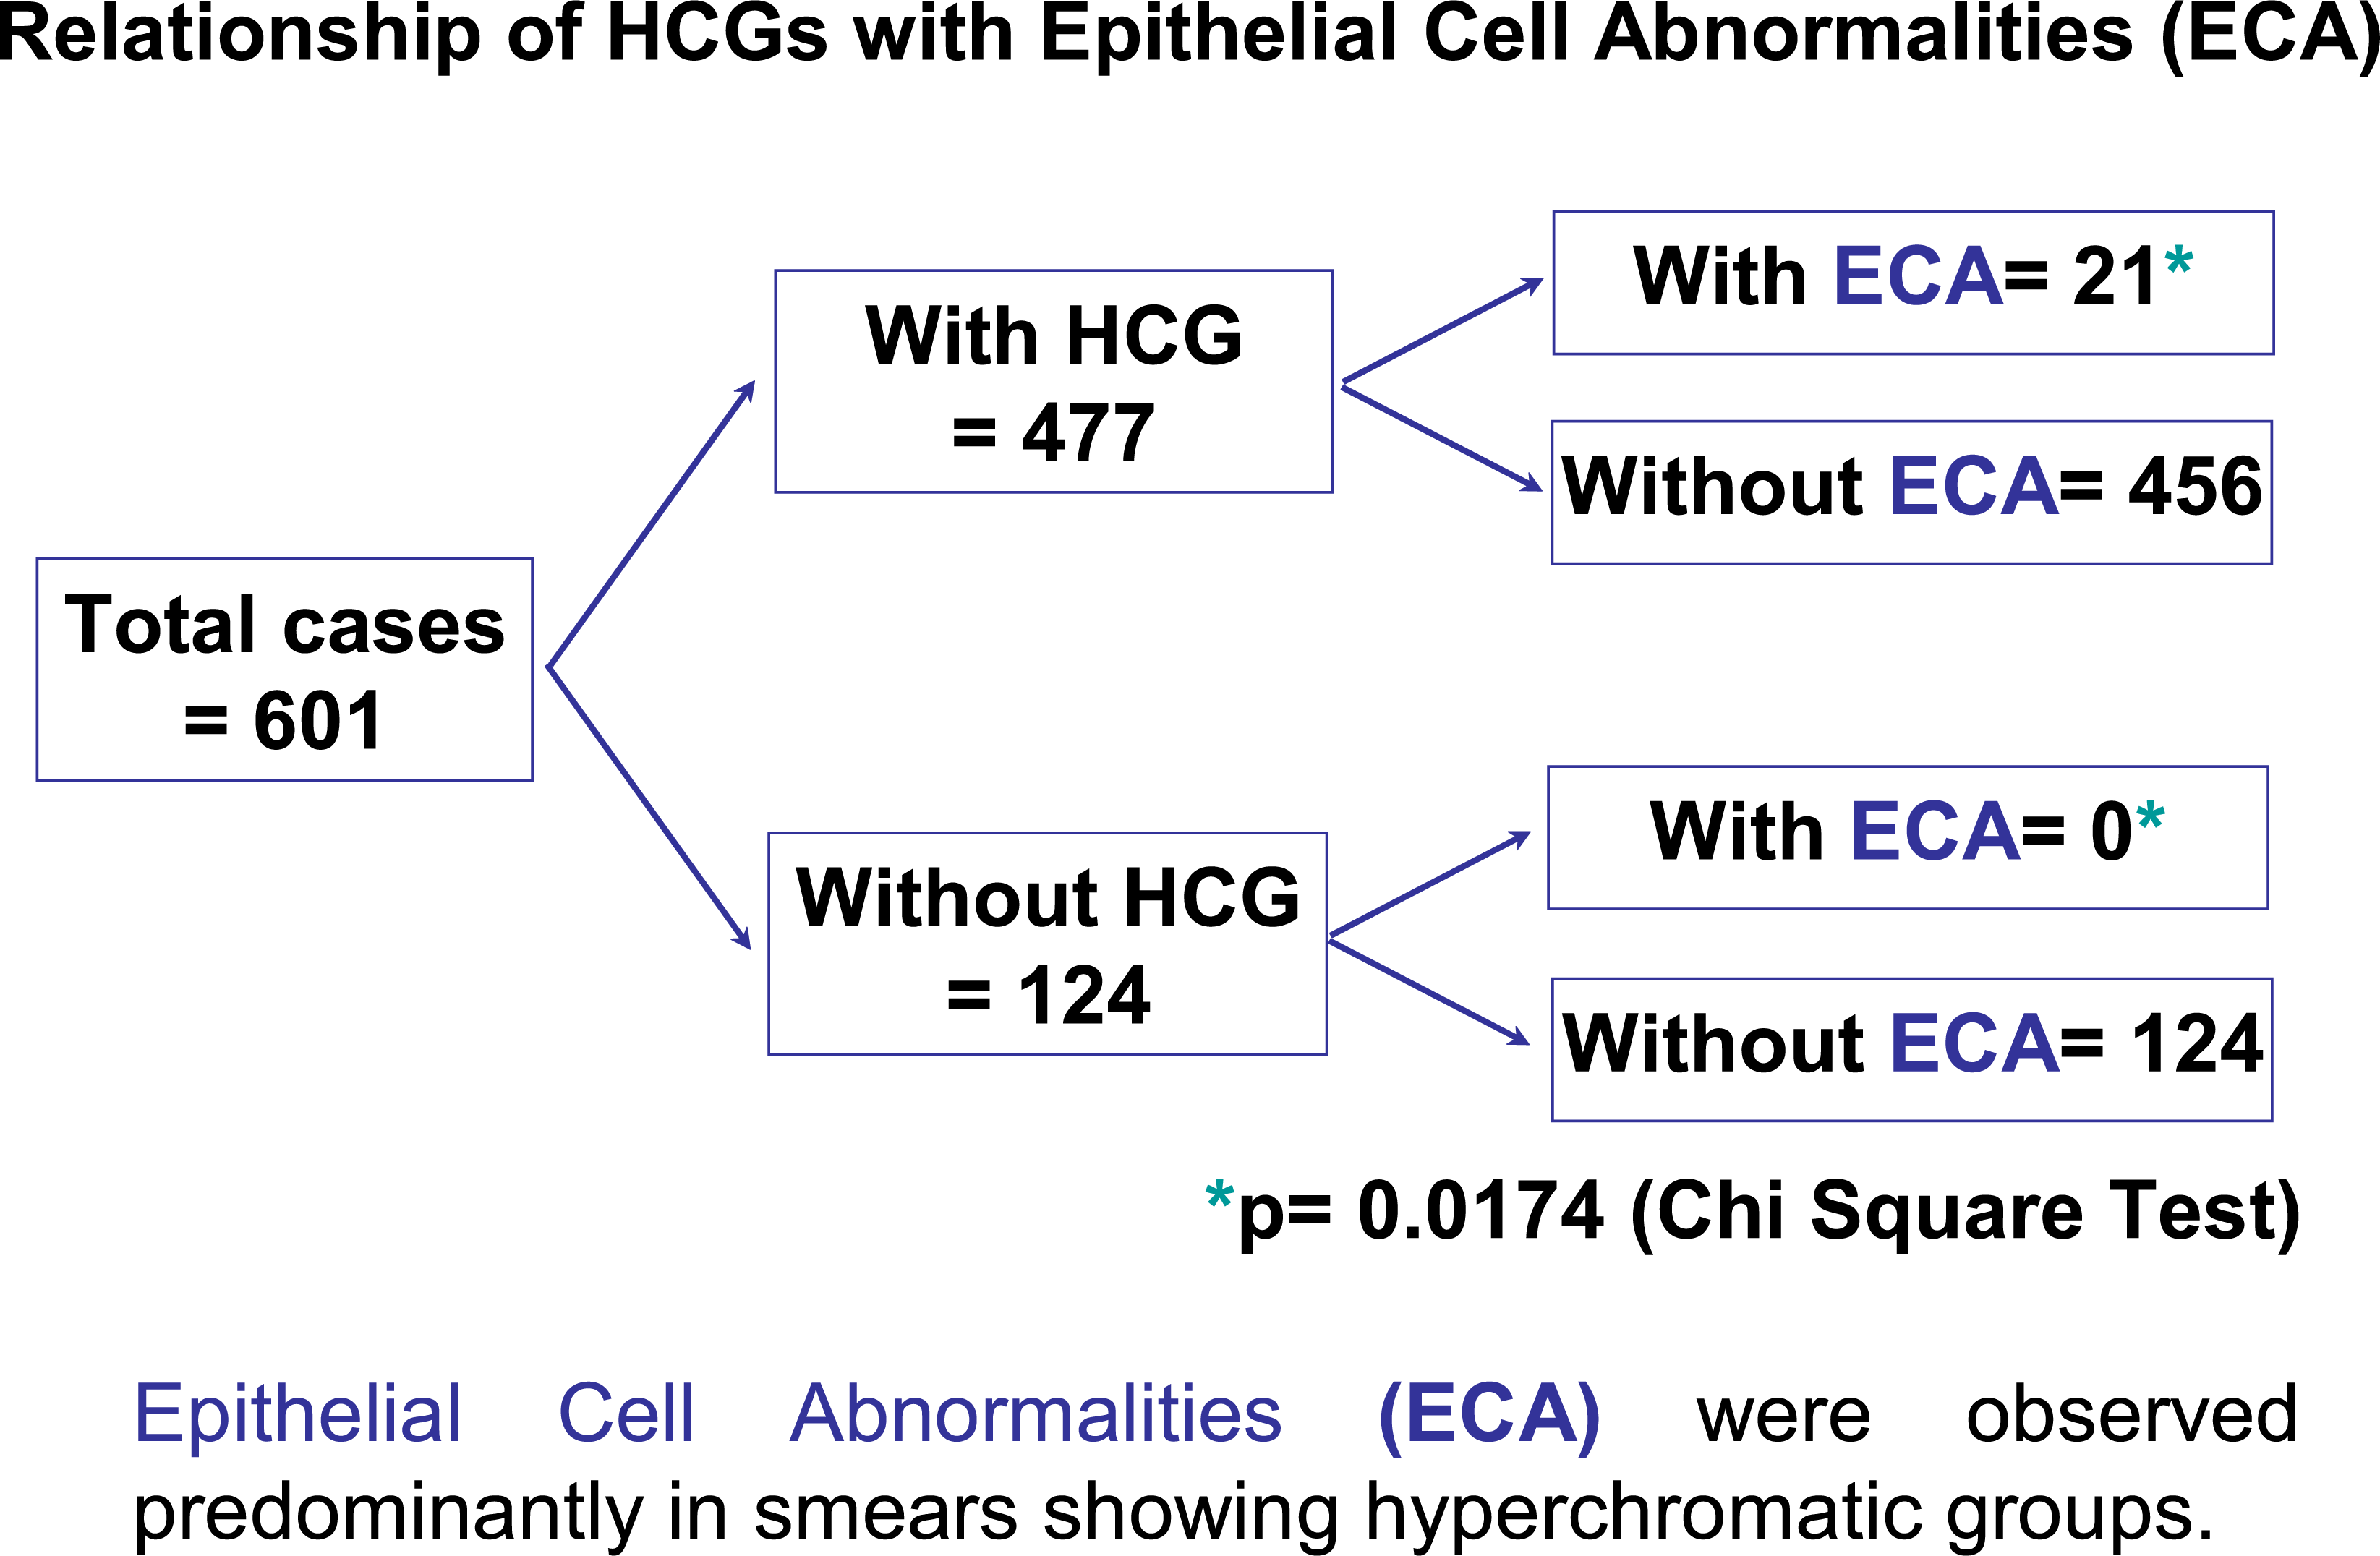 Relationship of HCGs with Epithelial abnormalities (ECA).